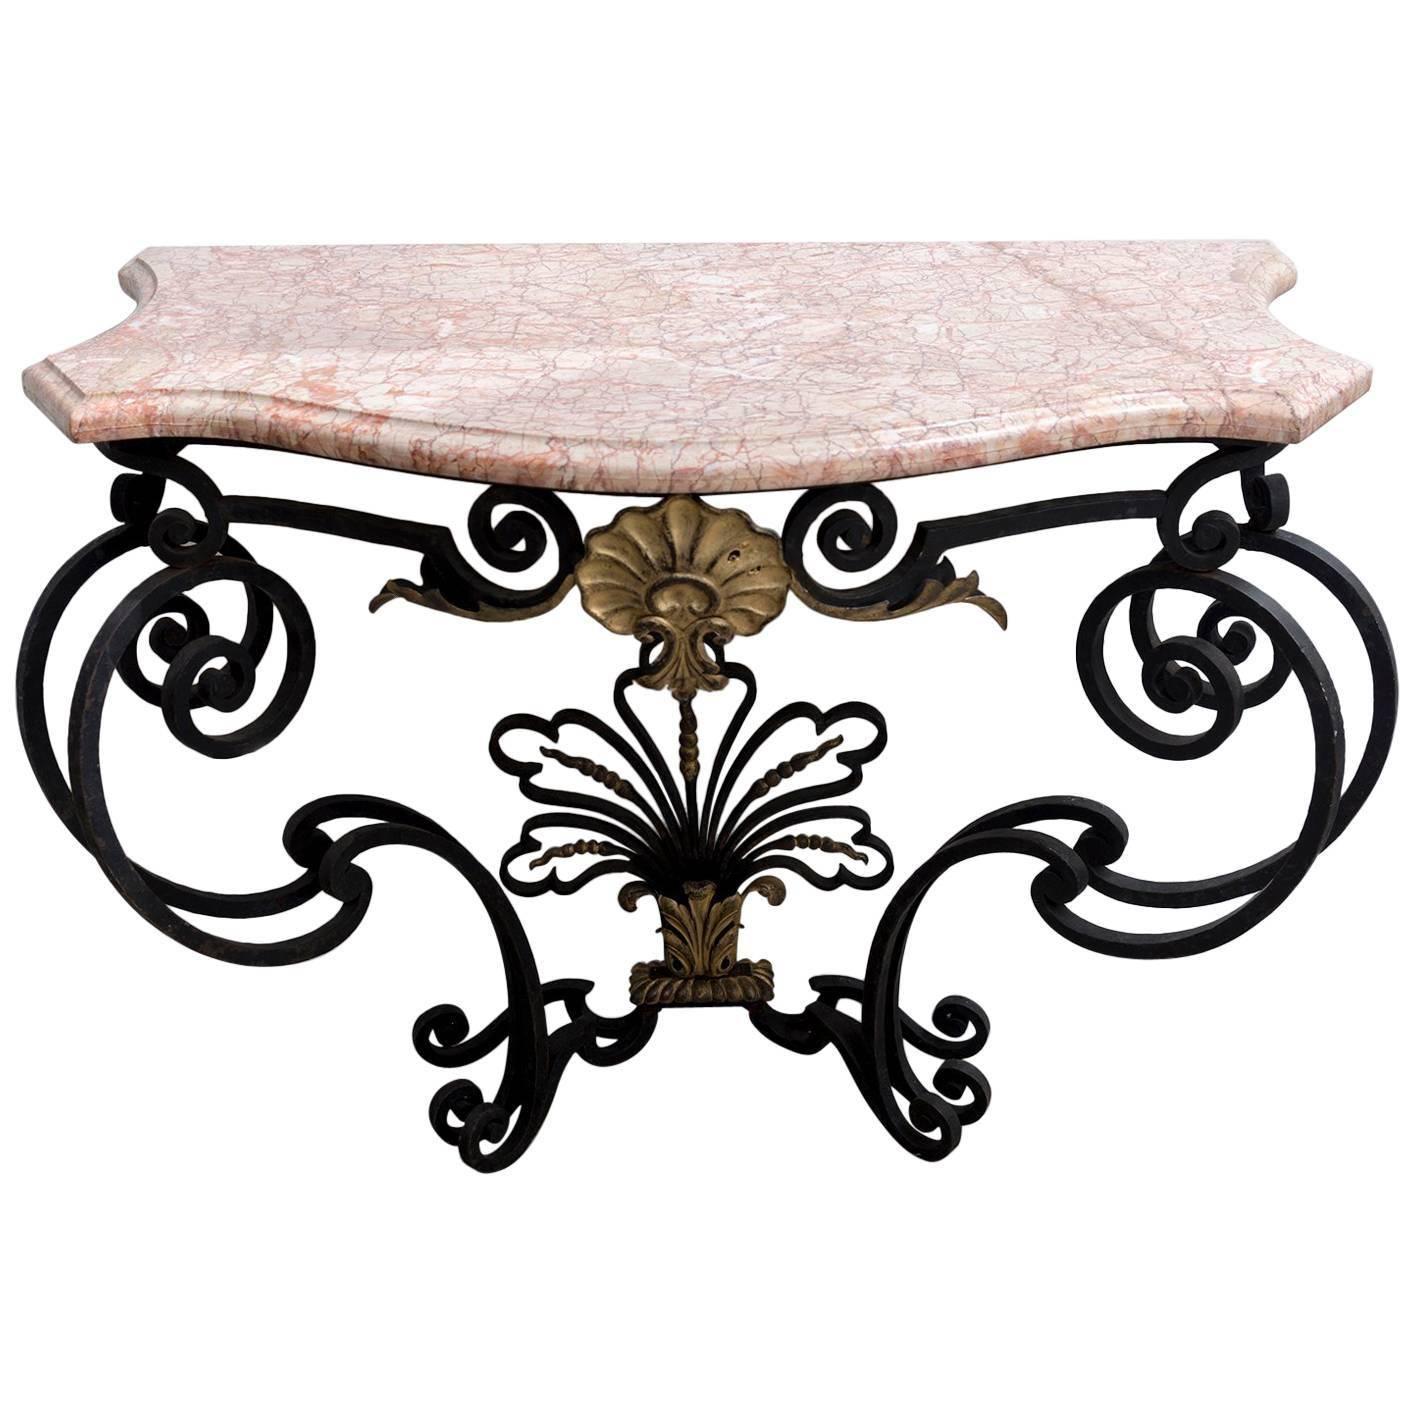 Gilt Natural Wrought Iron Console with a Marble Top